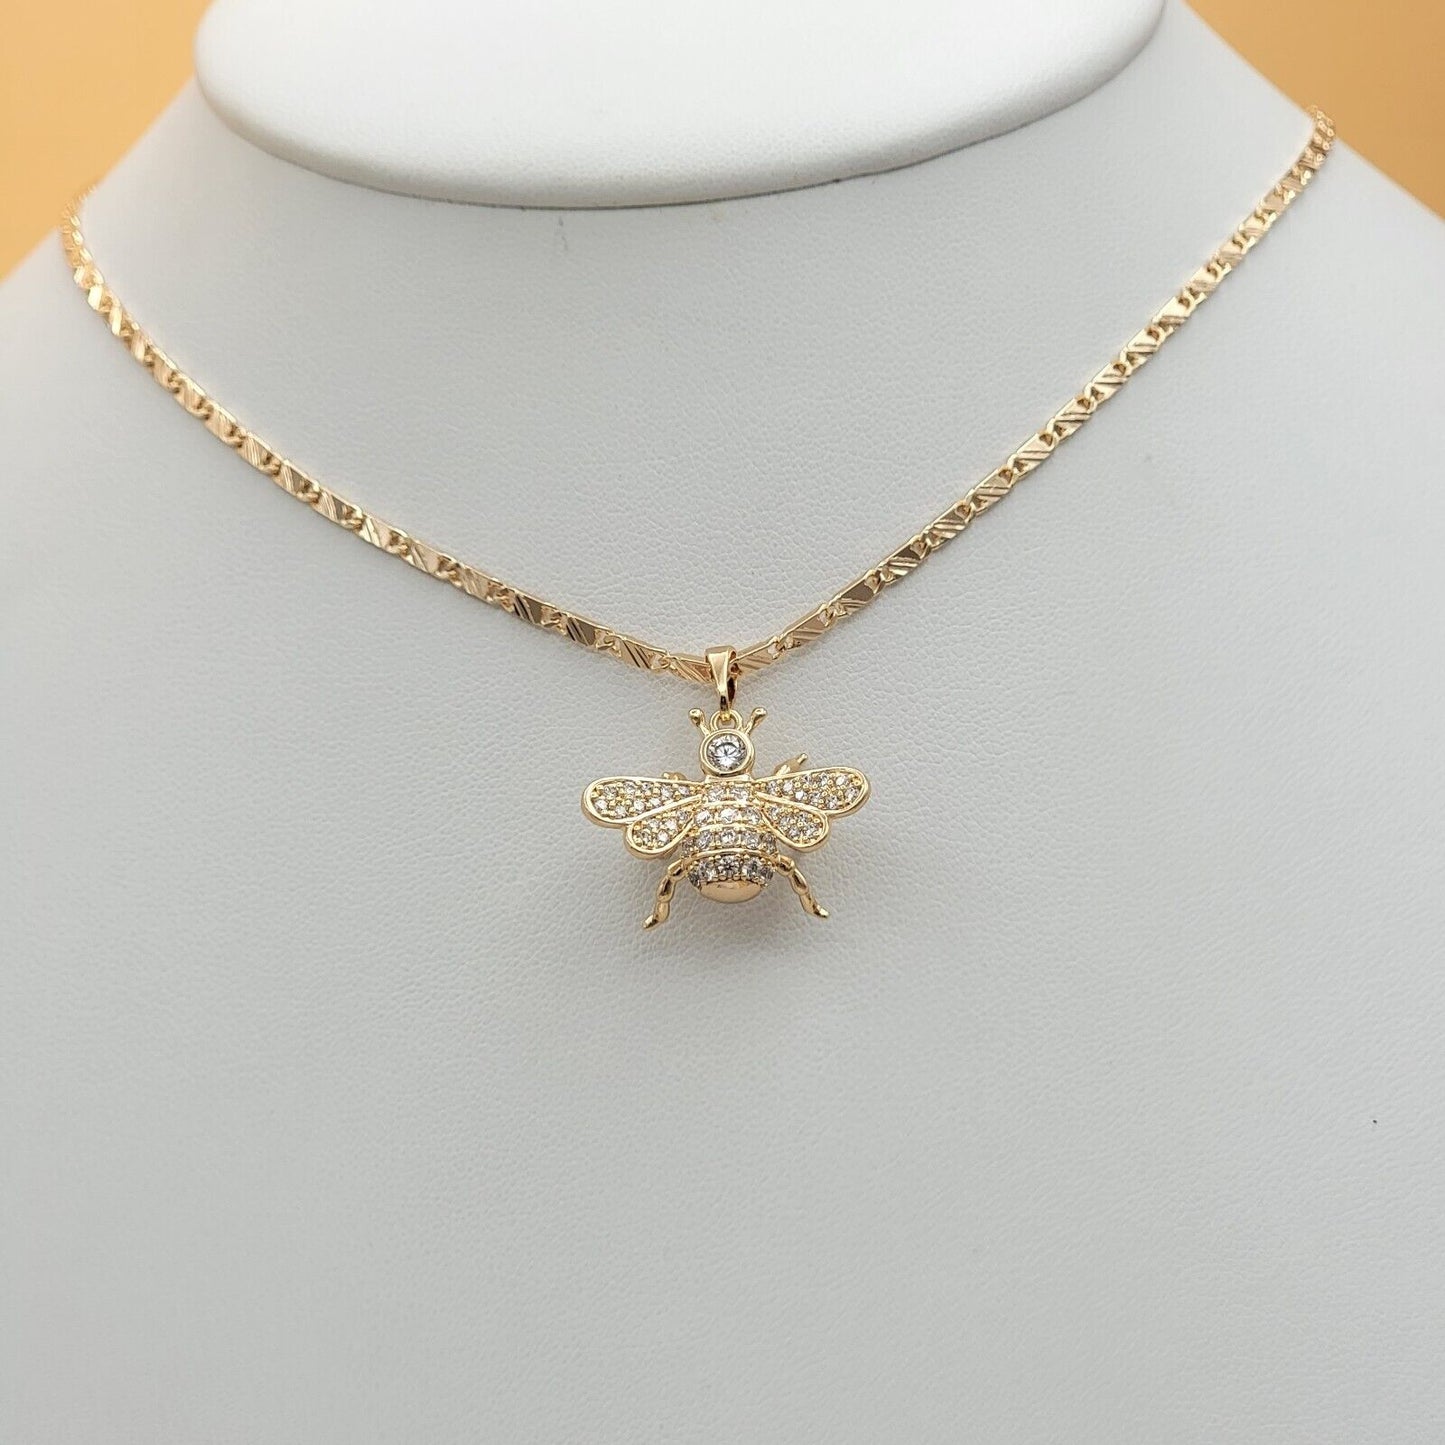 Necklaces - 18K Gold Plated. Clear CZ Queen Bee Pendant & Chain. Diligence Wisdom